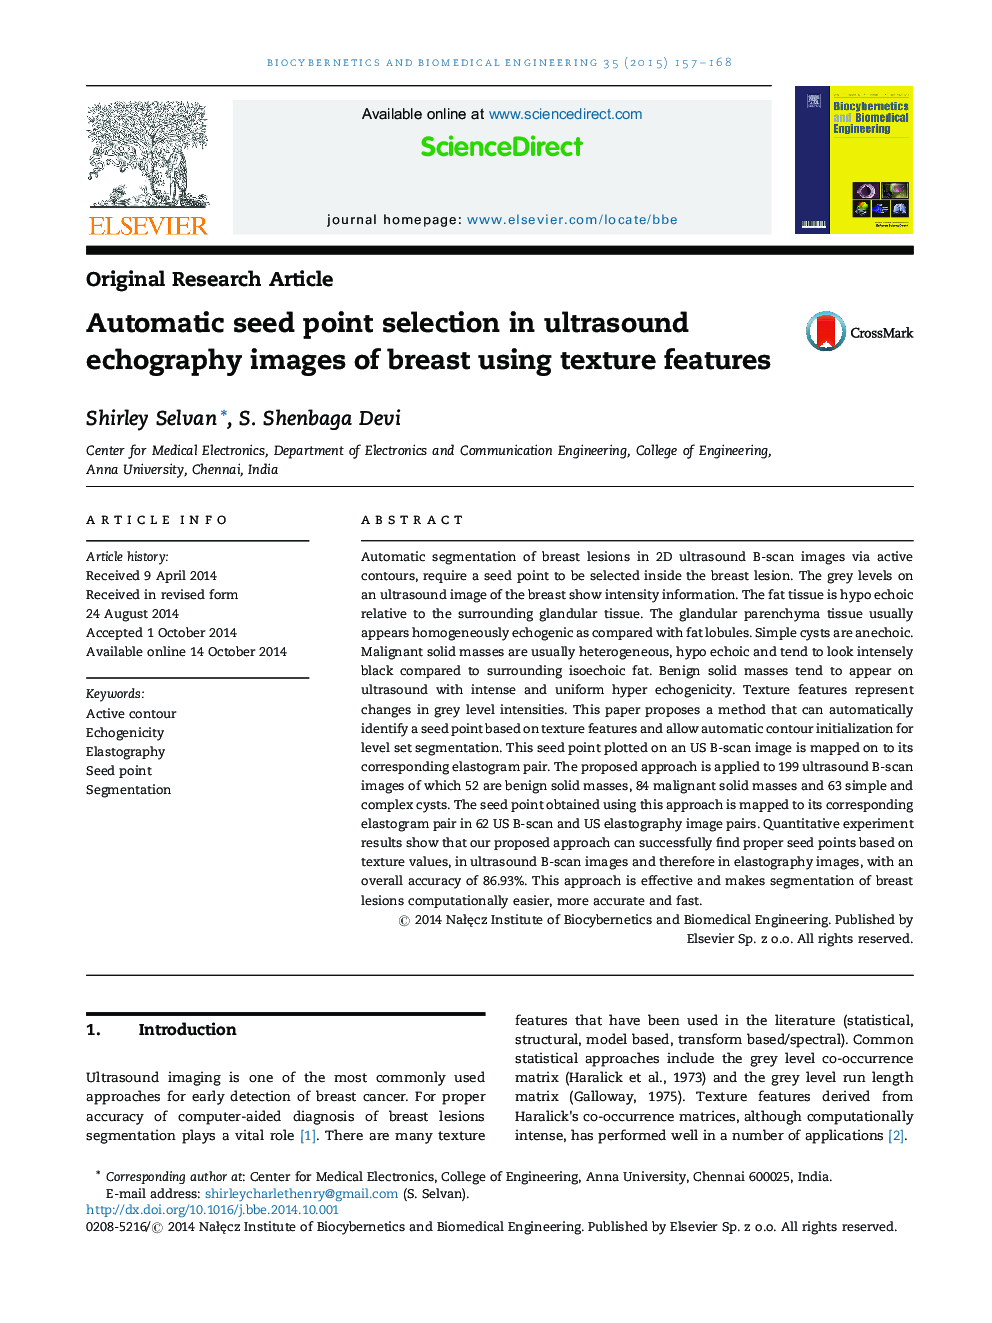 Automatic seed point selection in ultrasound echography images of breast using texture features